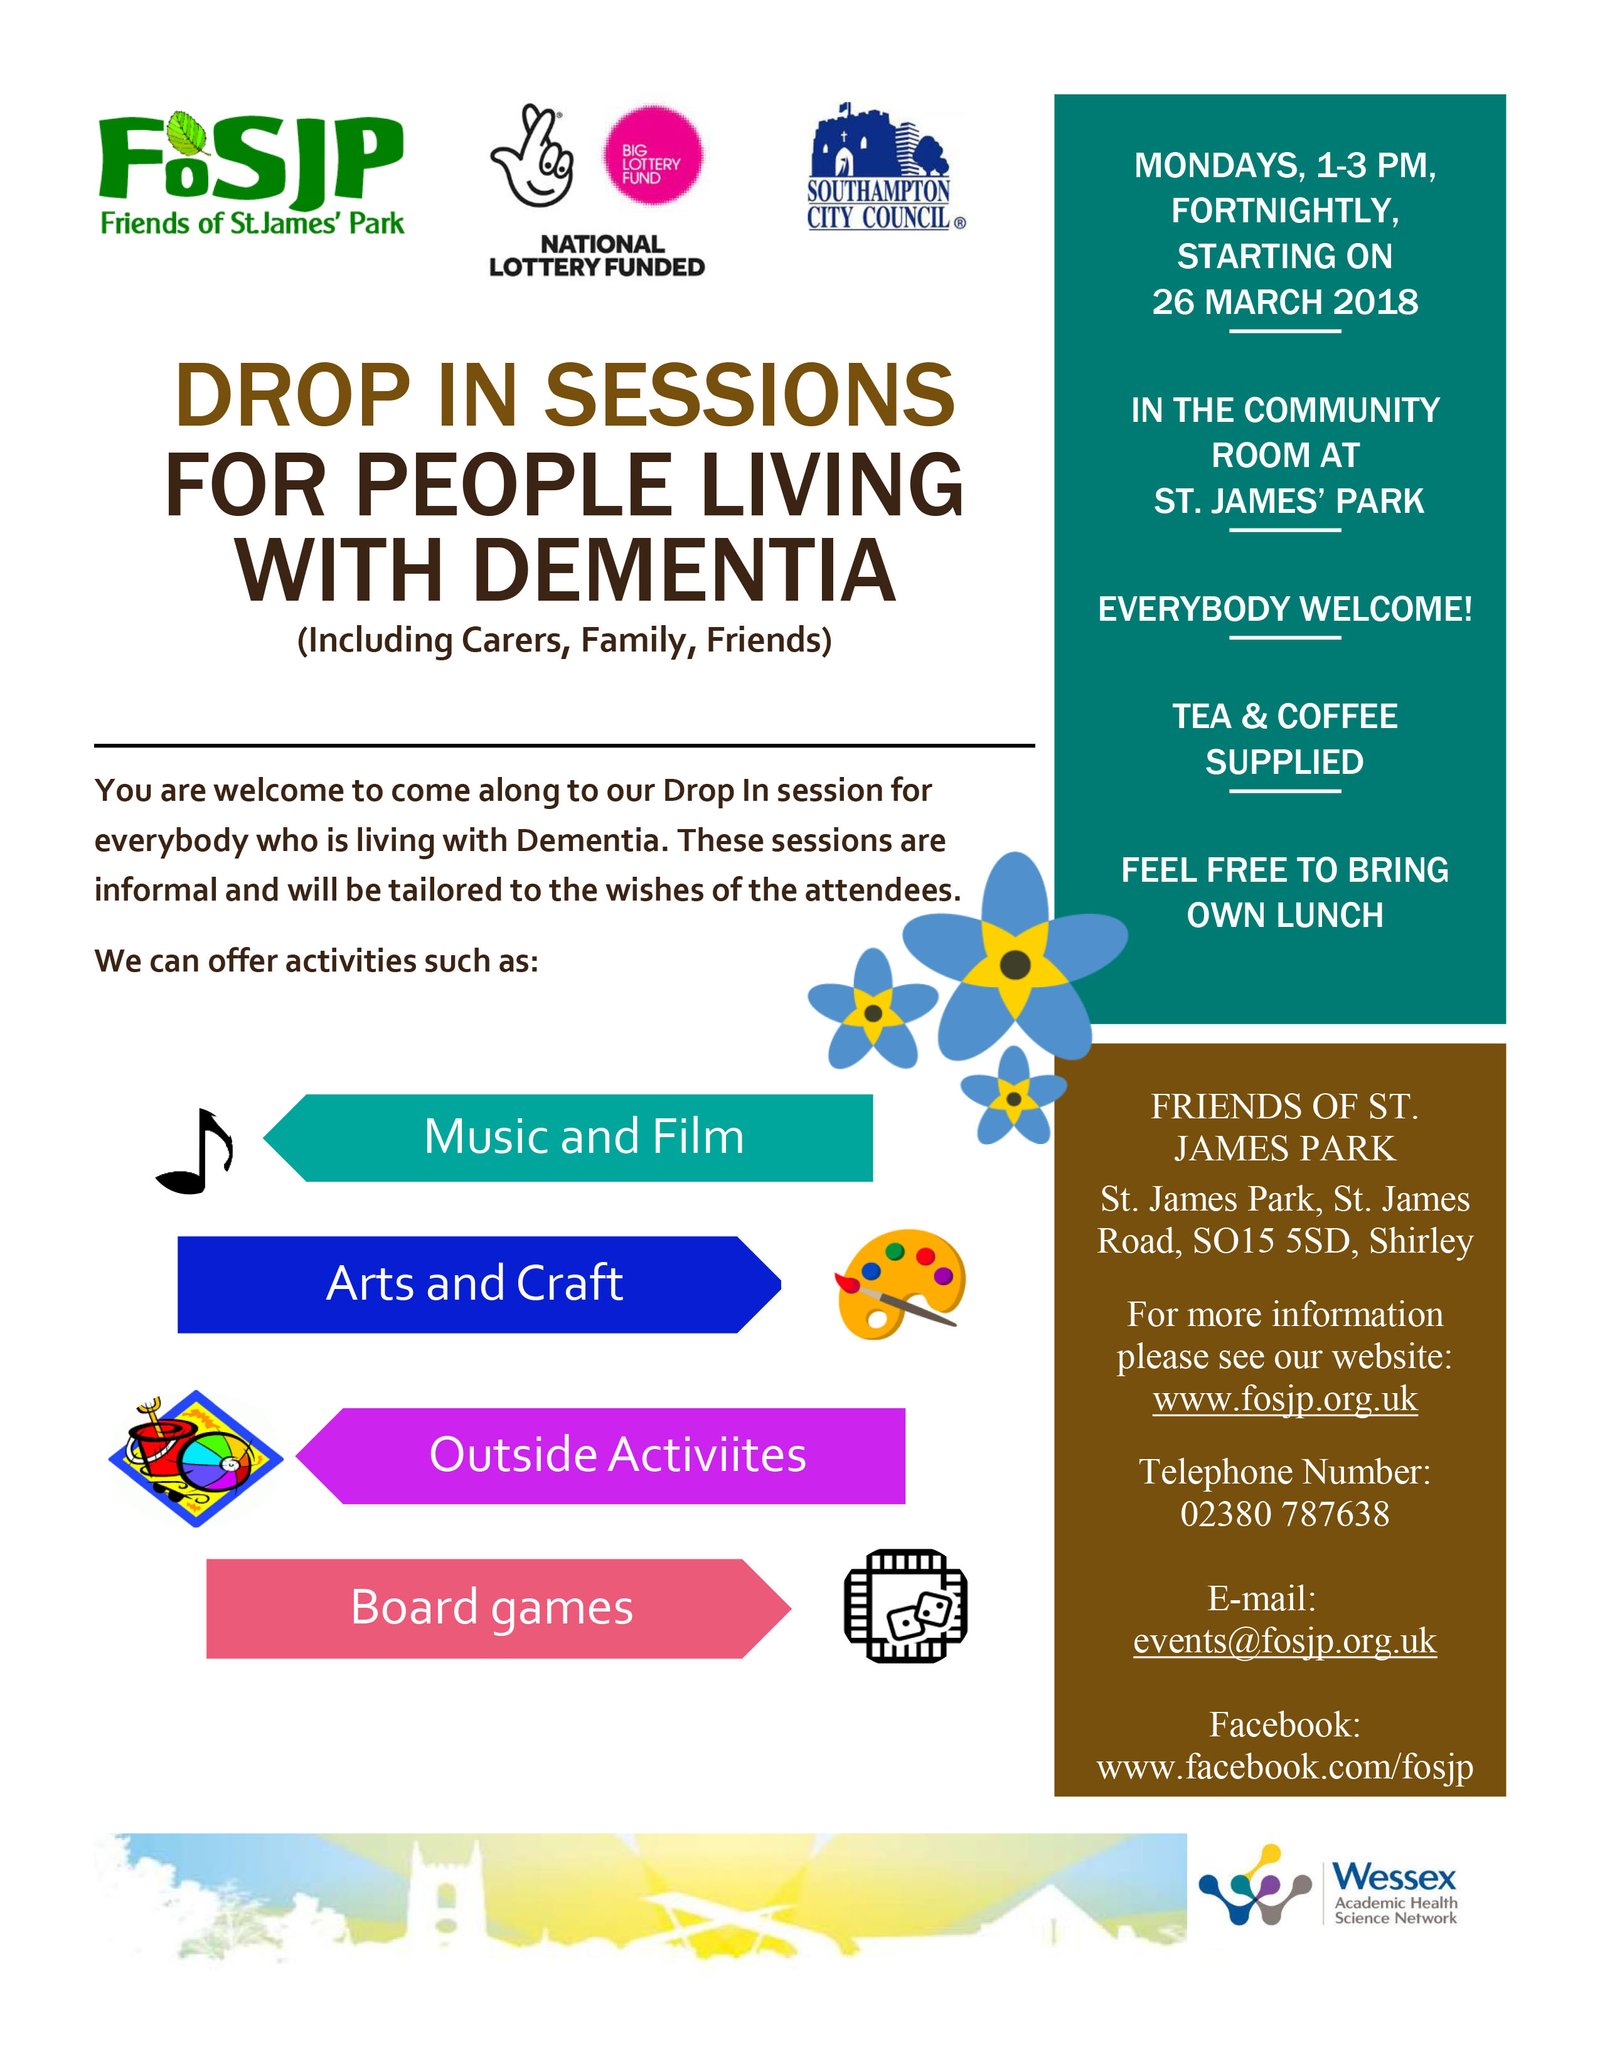 Drop-in Sessions for people living with Dementia